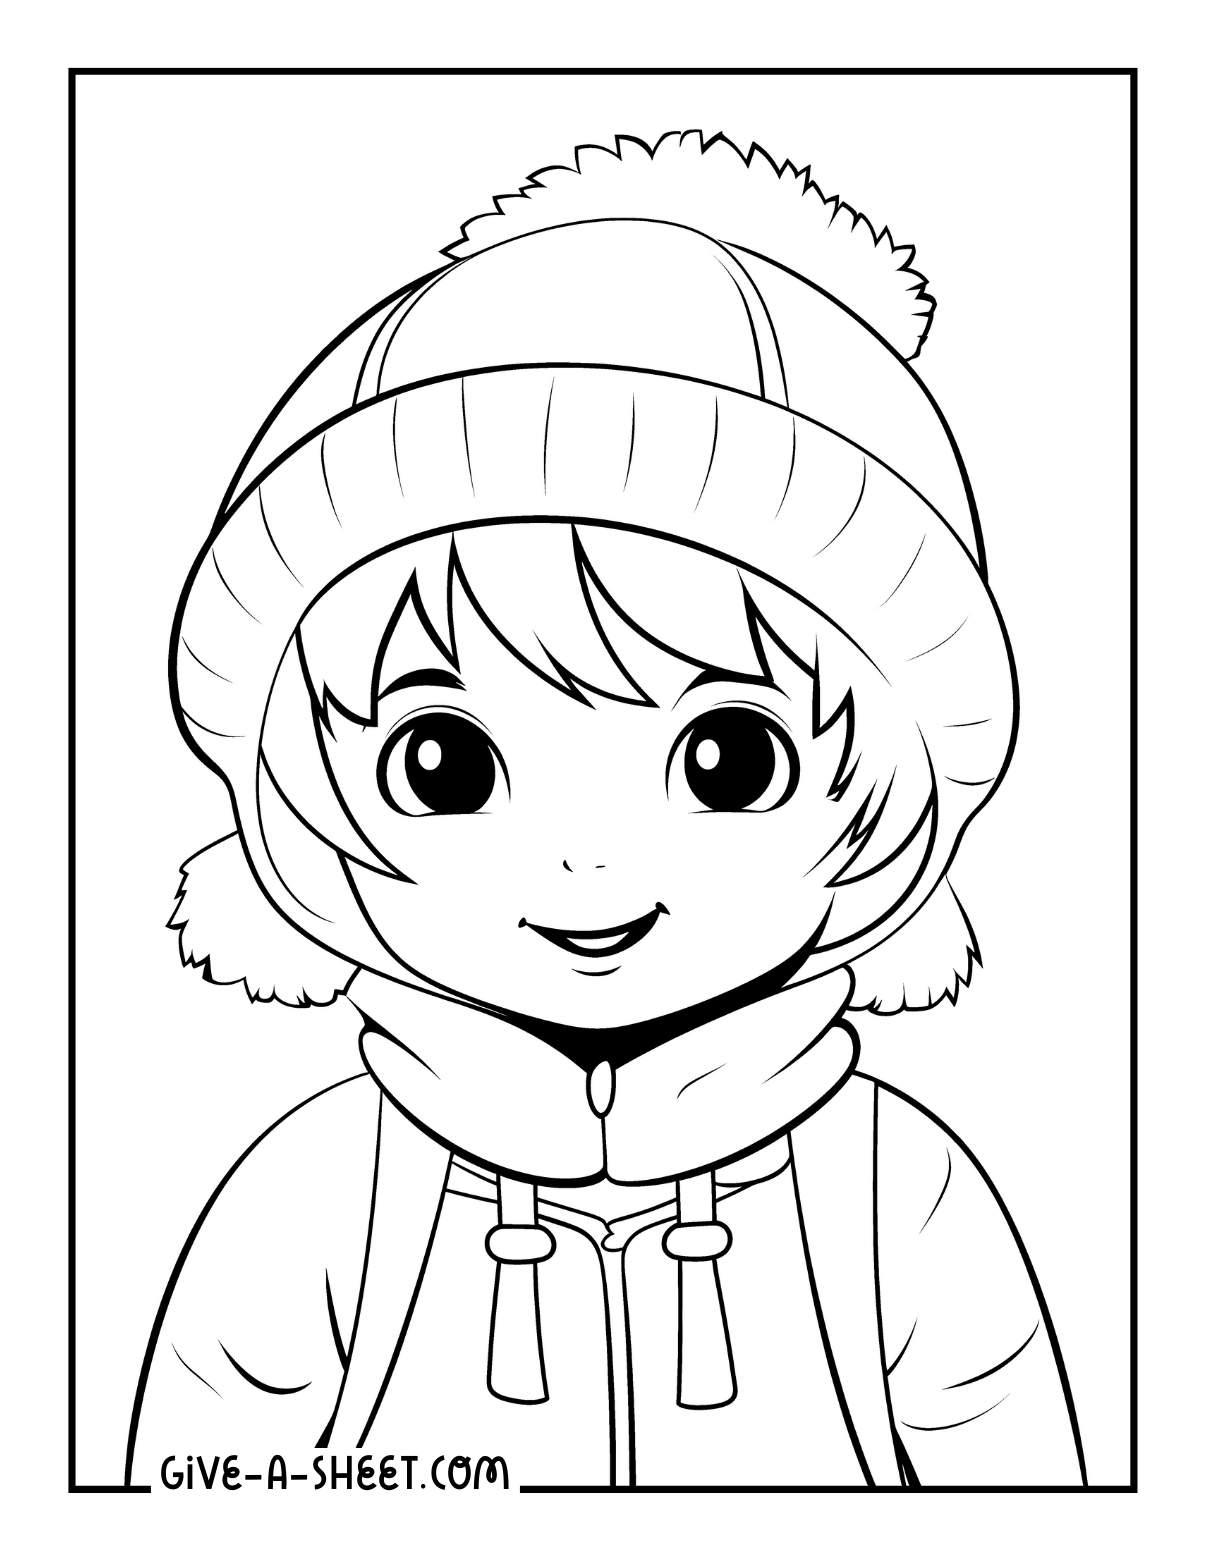 Woman wearing a wool winter hat coloring page for kids.